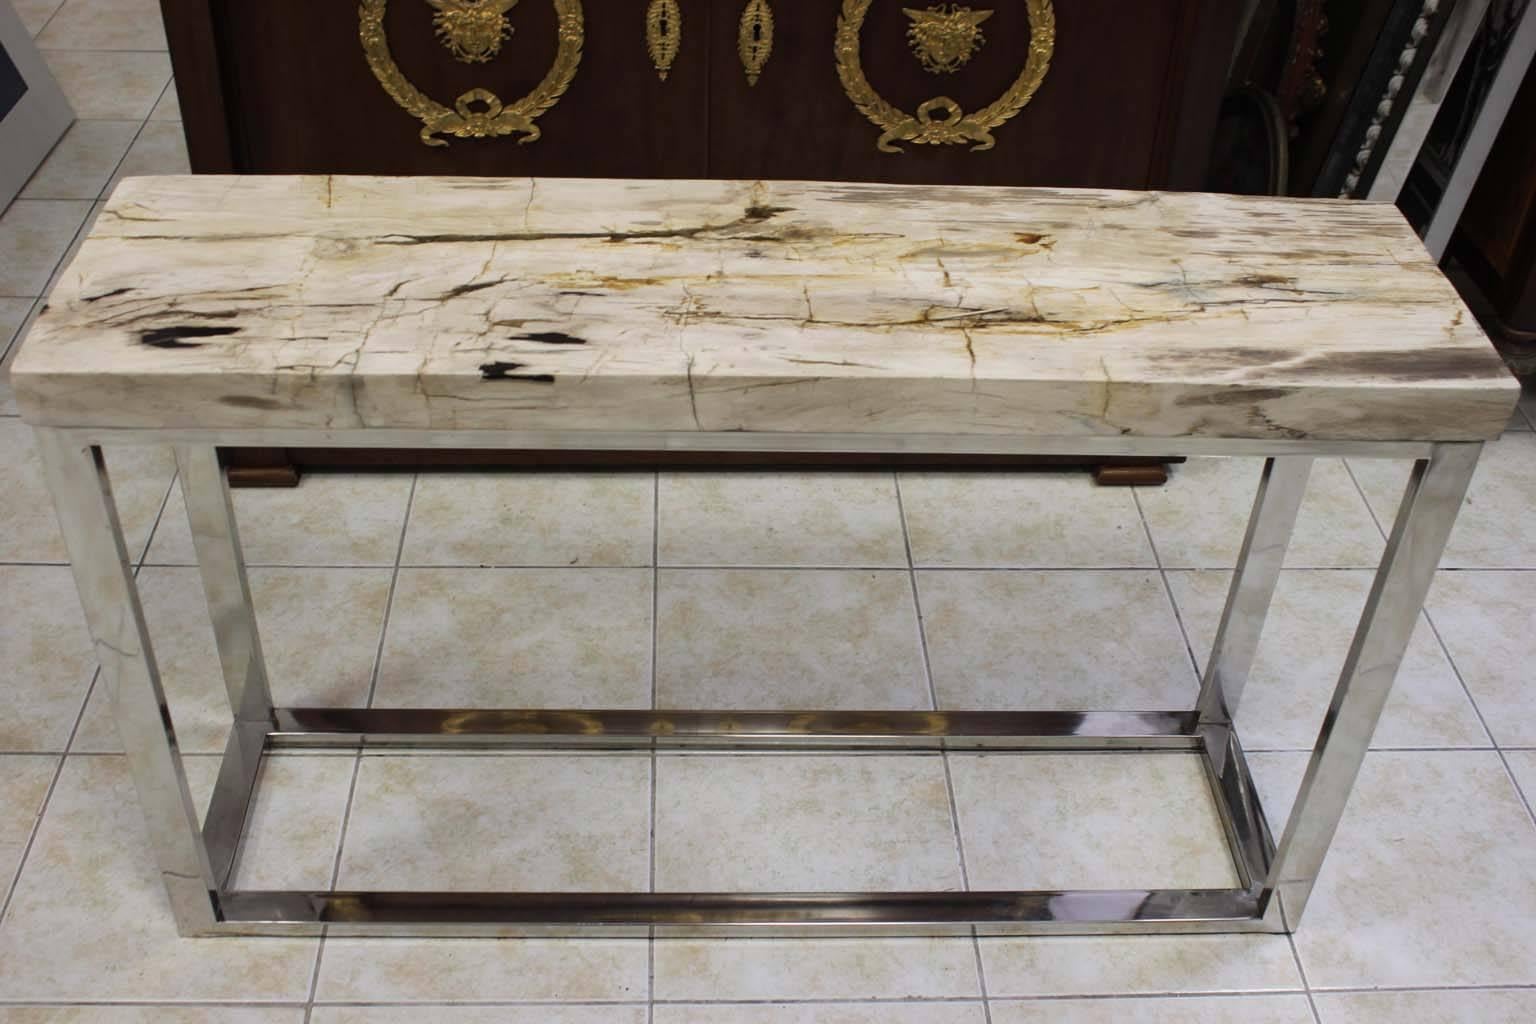 Elegant petrified wood console with stainless steel base. 25MA petrified wood top in one piece. White and beige color.
Dimensions: L 110cm, H 65cm, D 30cm.